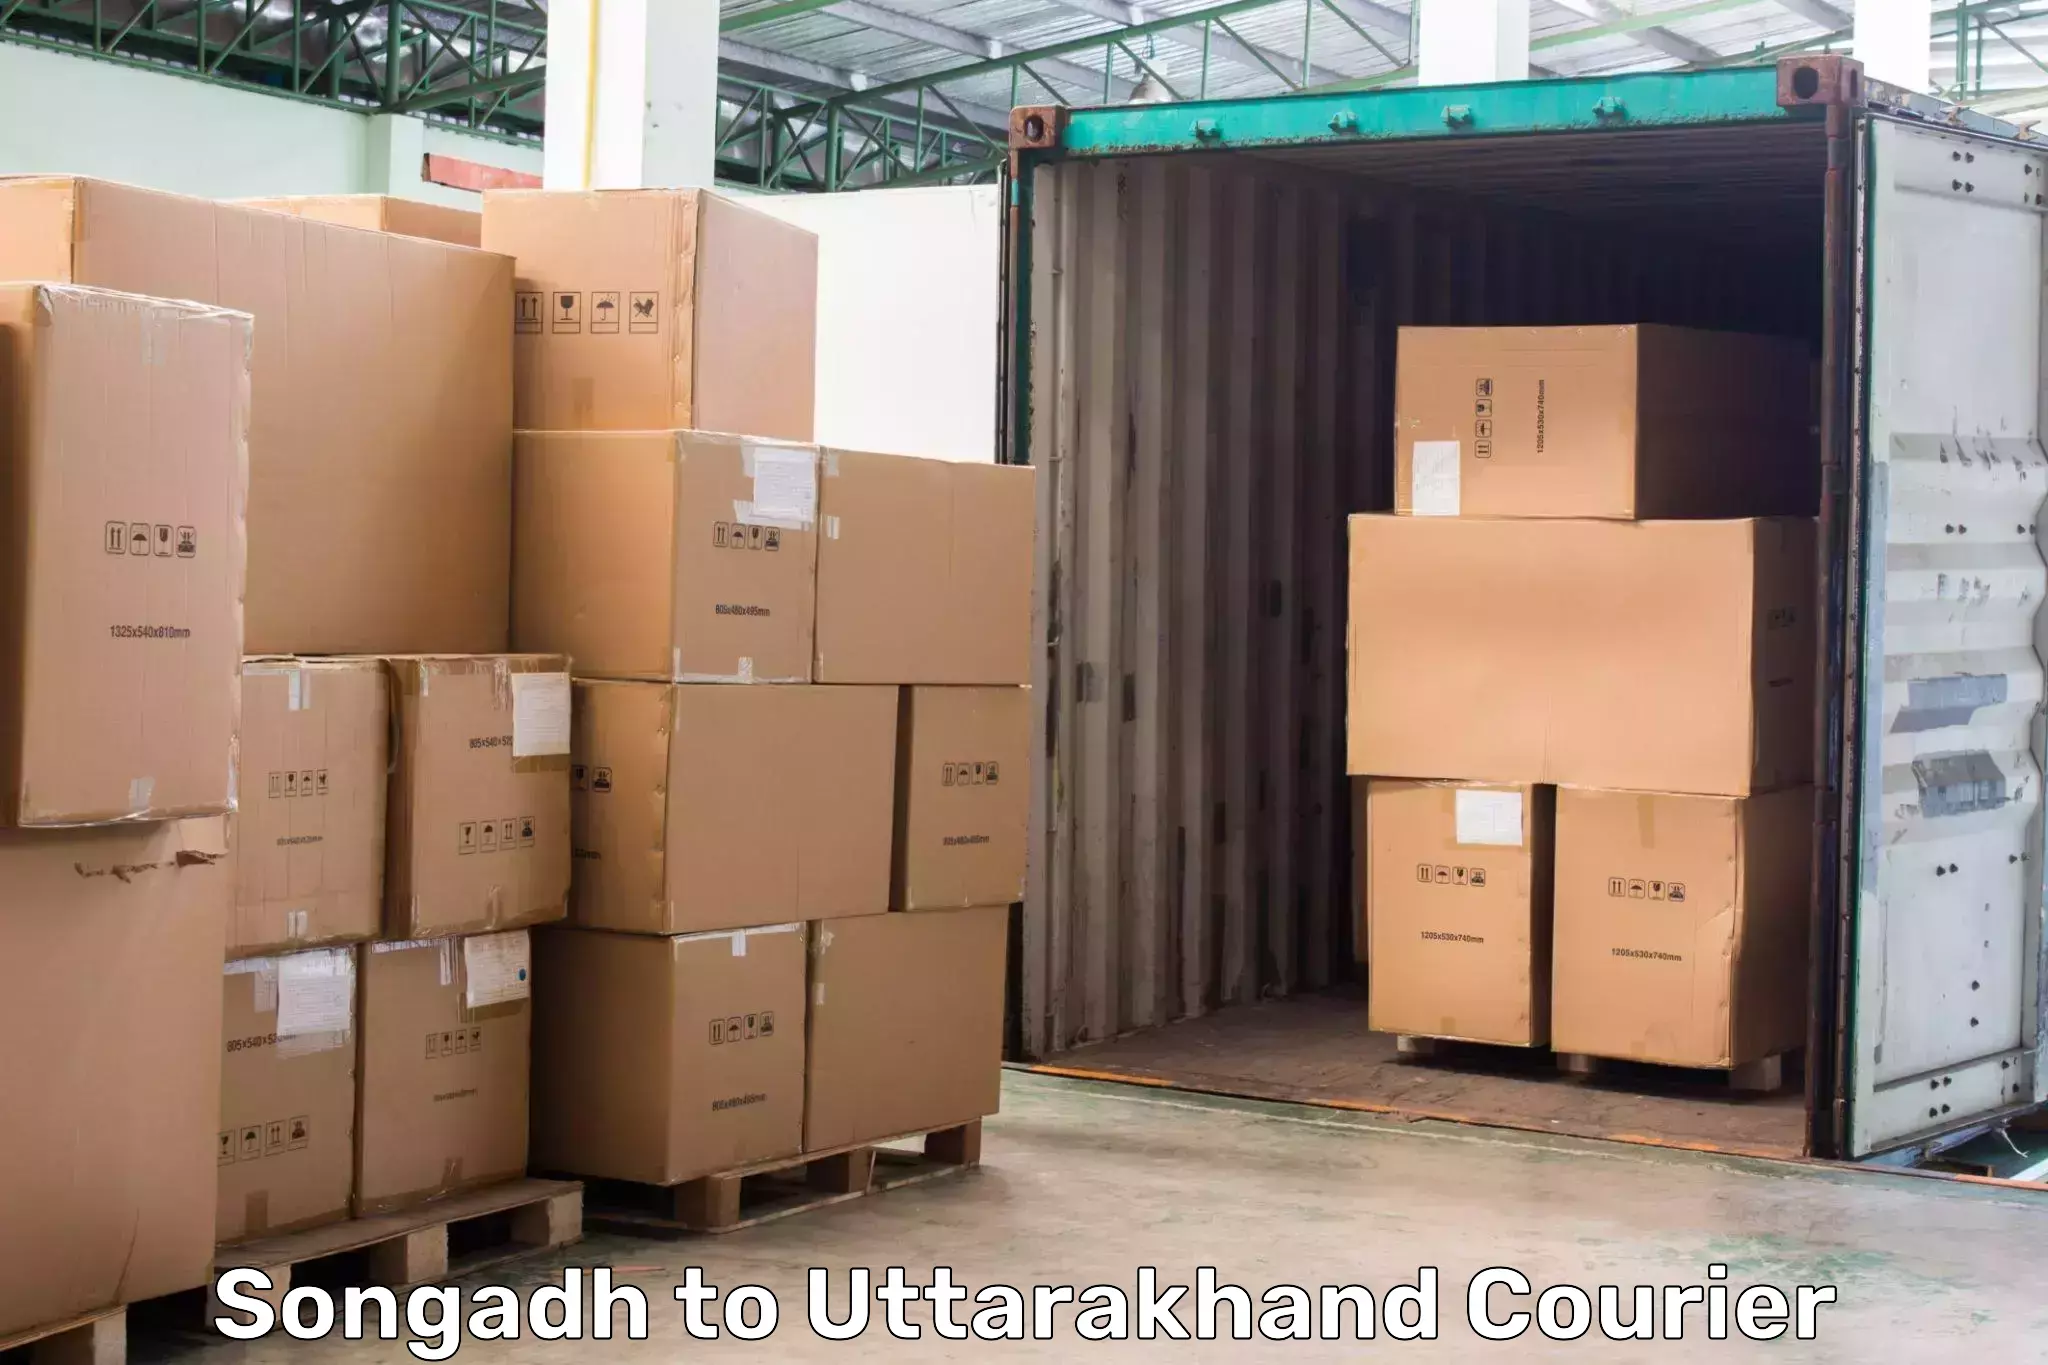 International courier rates Songadh to Rishikesh